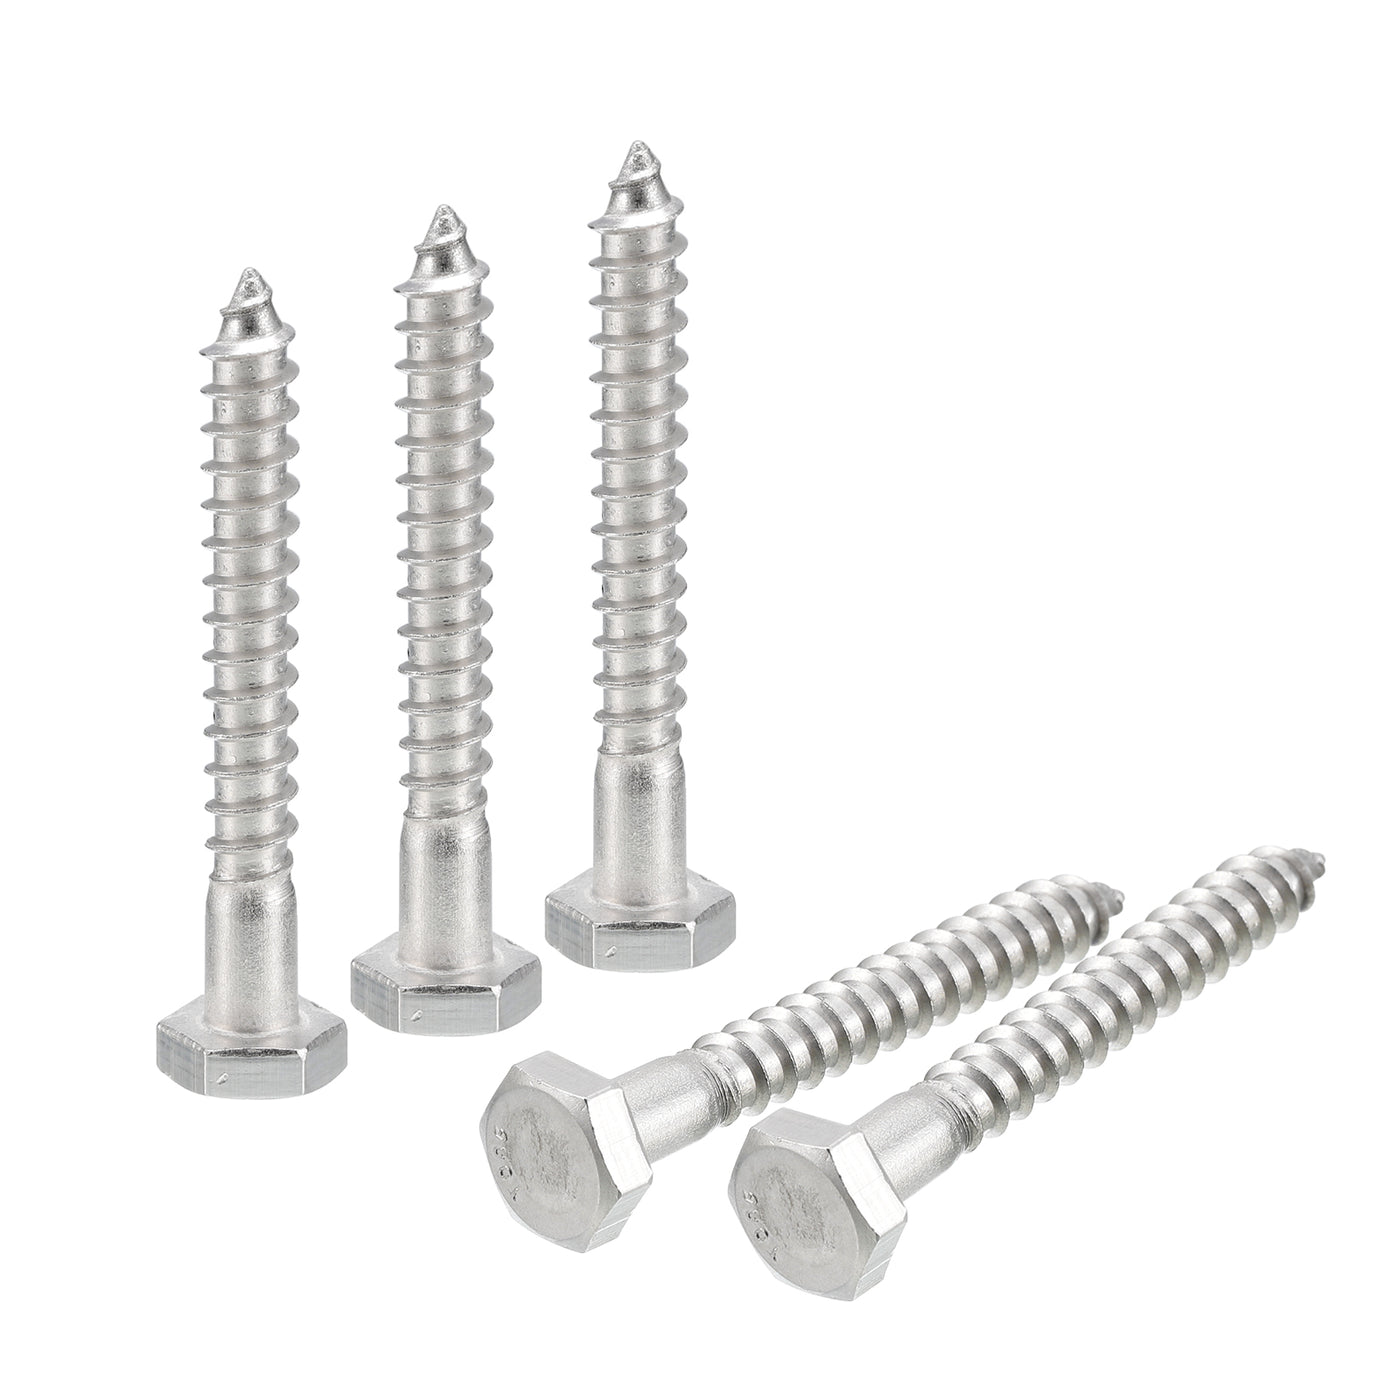 uxcell Uxcell Hex Head Lag Screws Bolts, 25pcs 1/4" x 2" 304 Stainless Steel Wood Screws